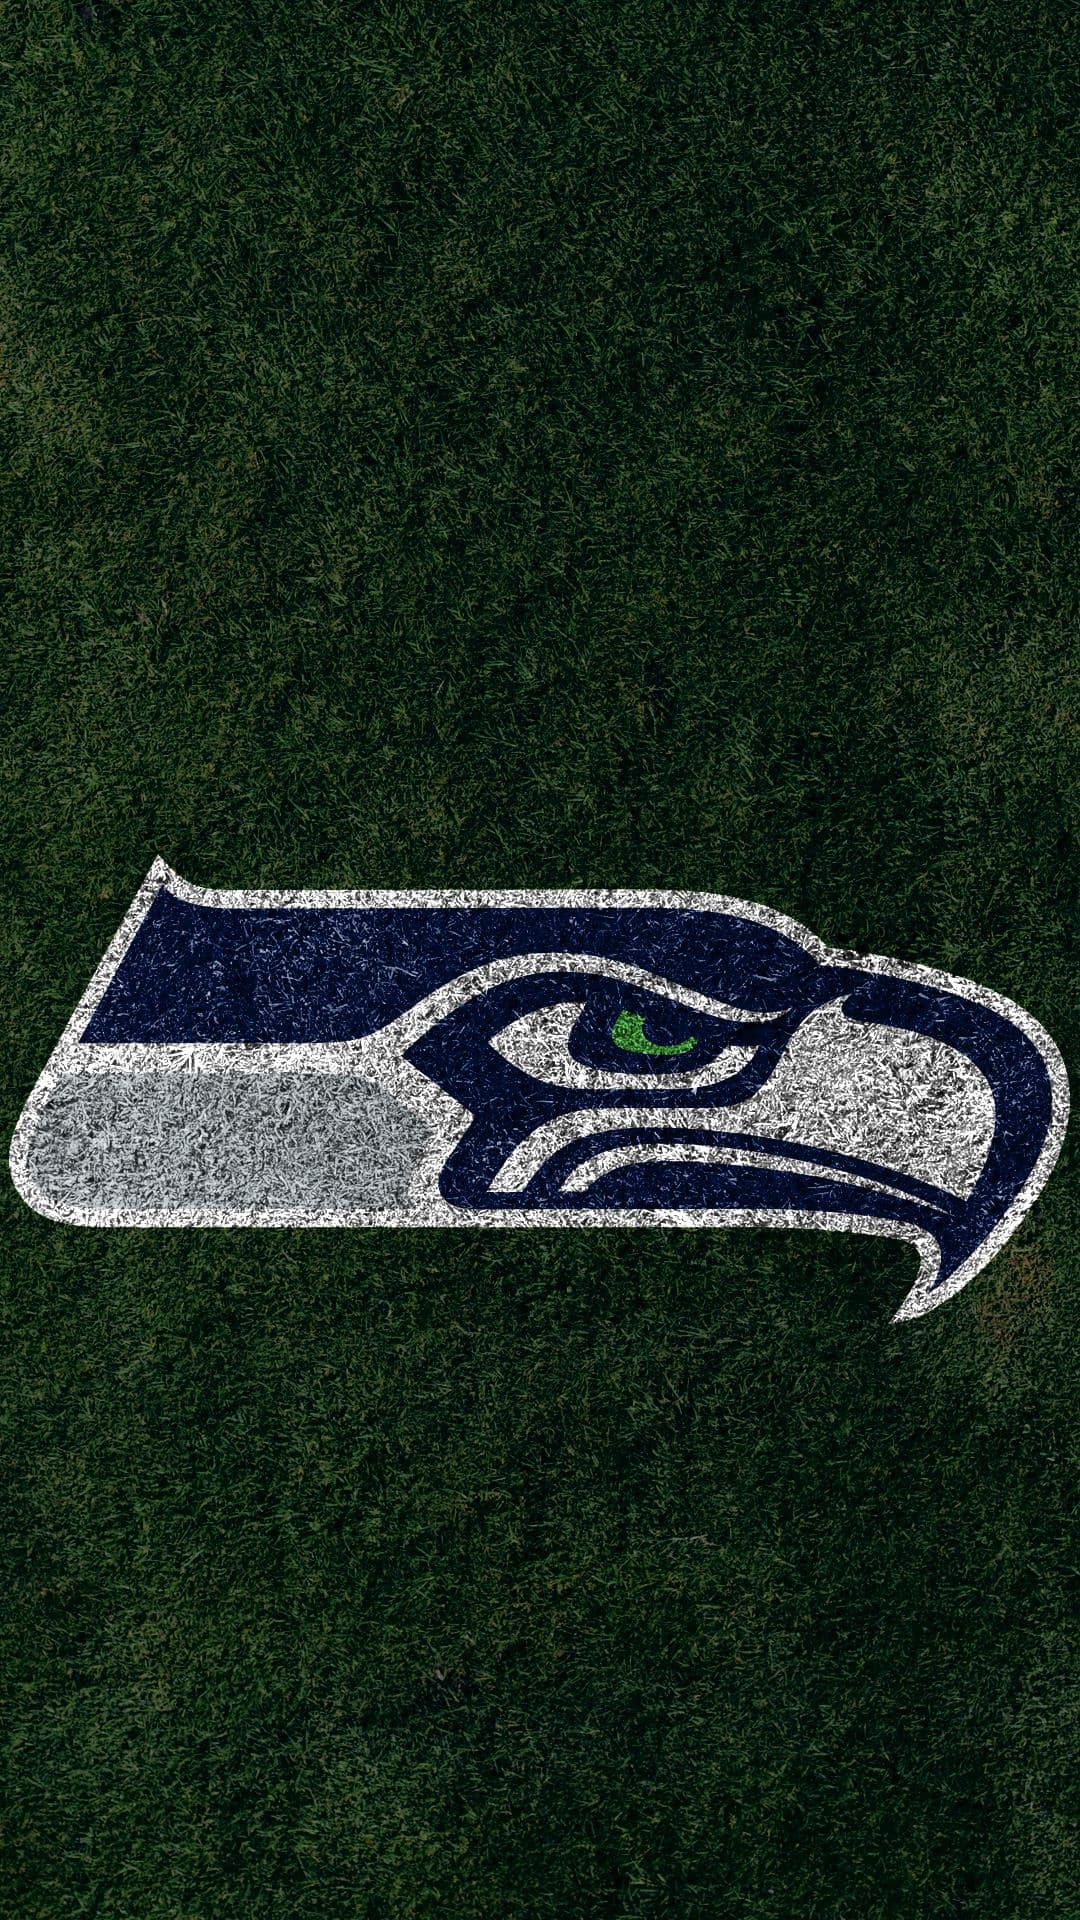 Seattle Seahawks Wallpaper Android. Wallpaper for Mobile